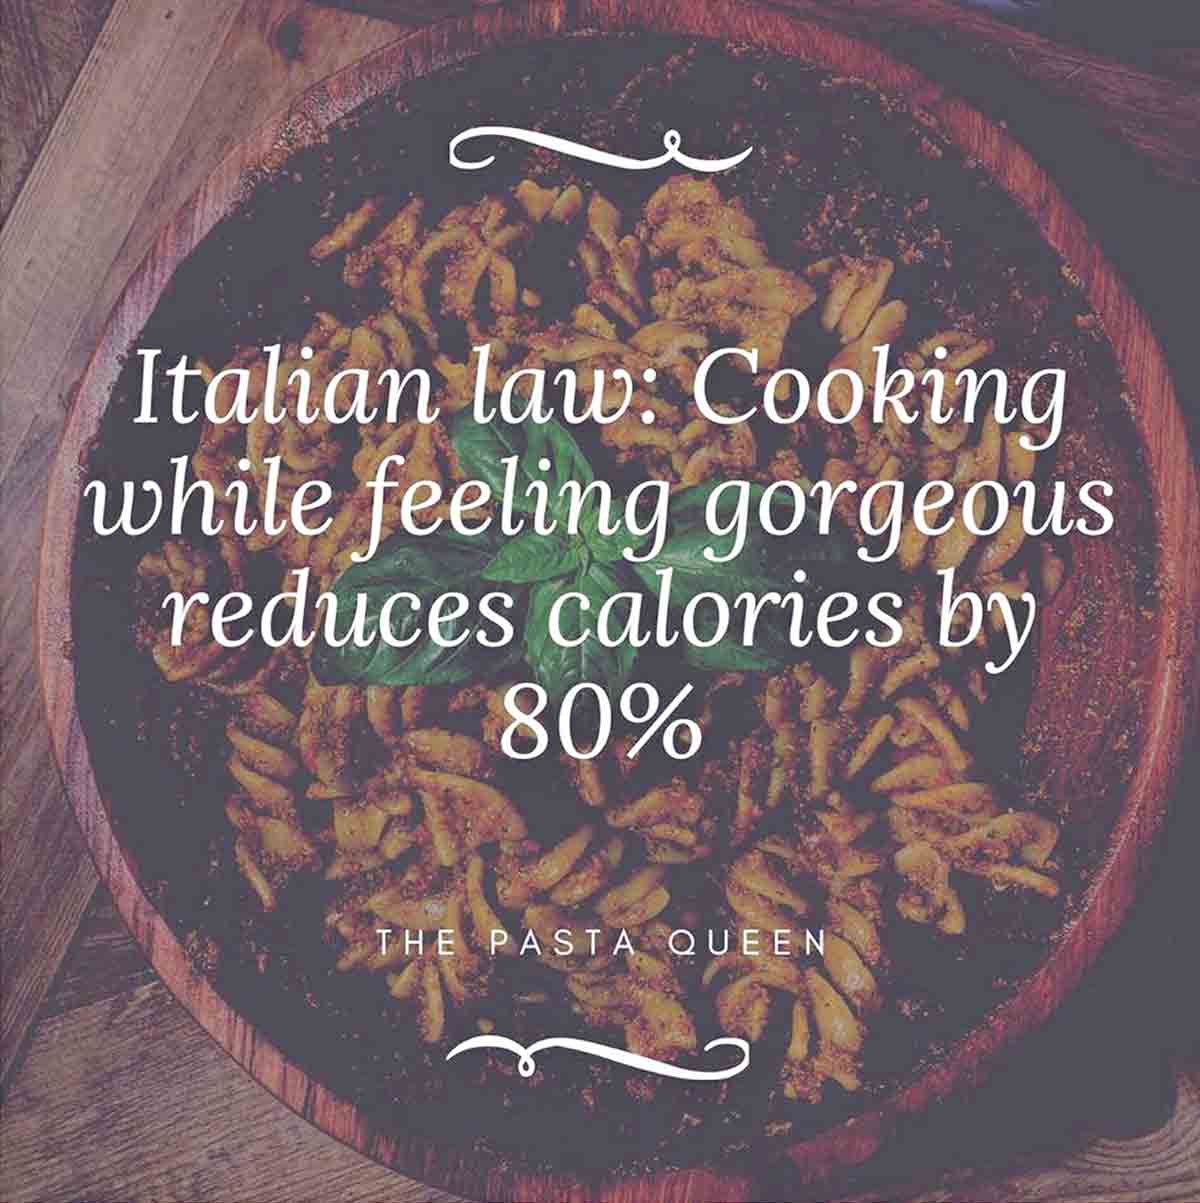 Italian Law: Cooking While Feeling Gorgeous Reduces Calories by 80%